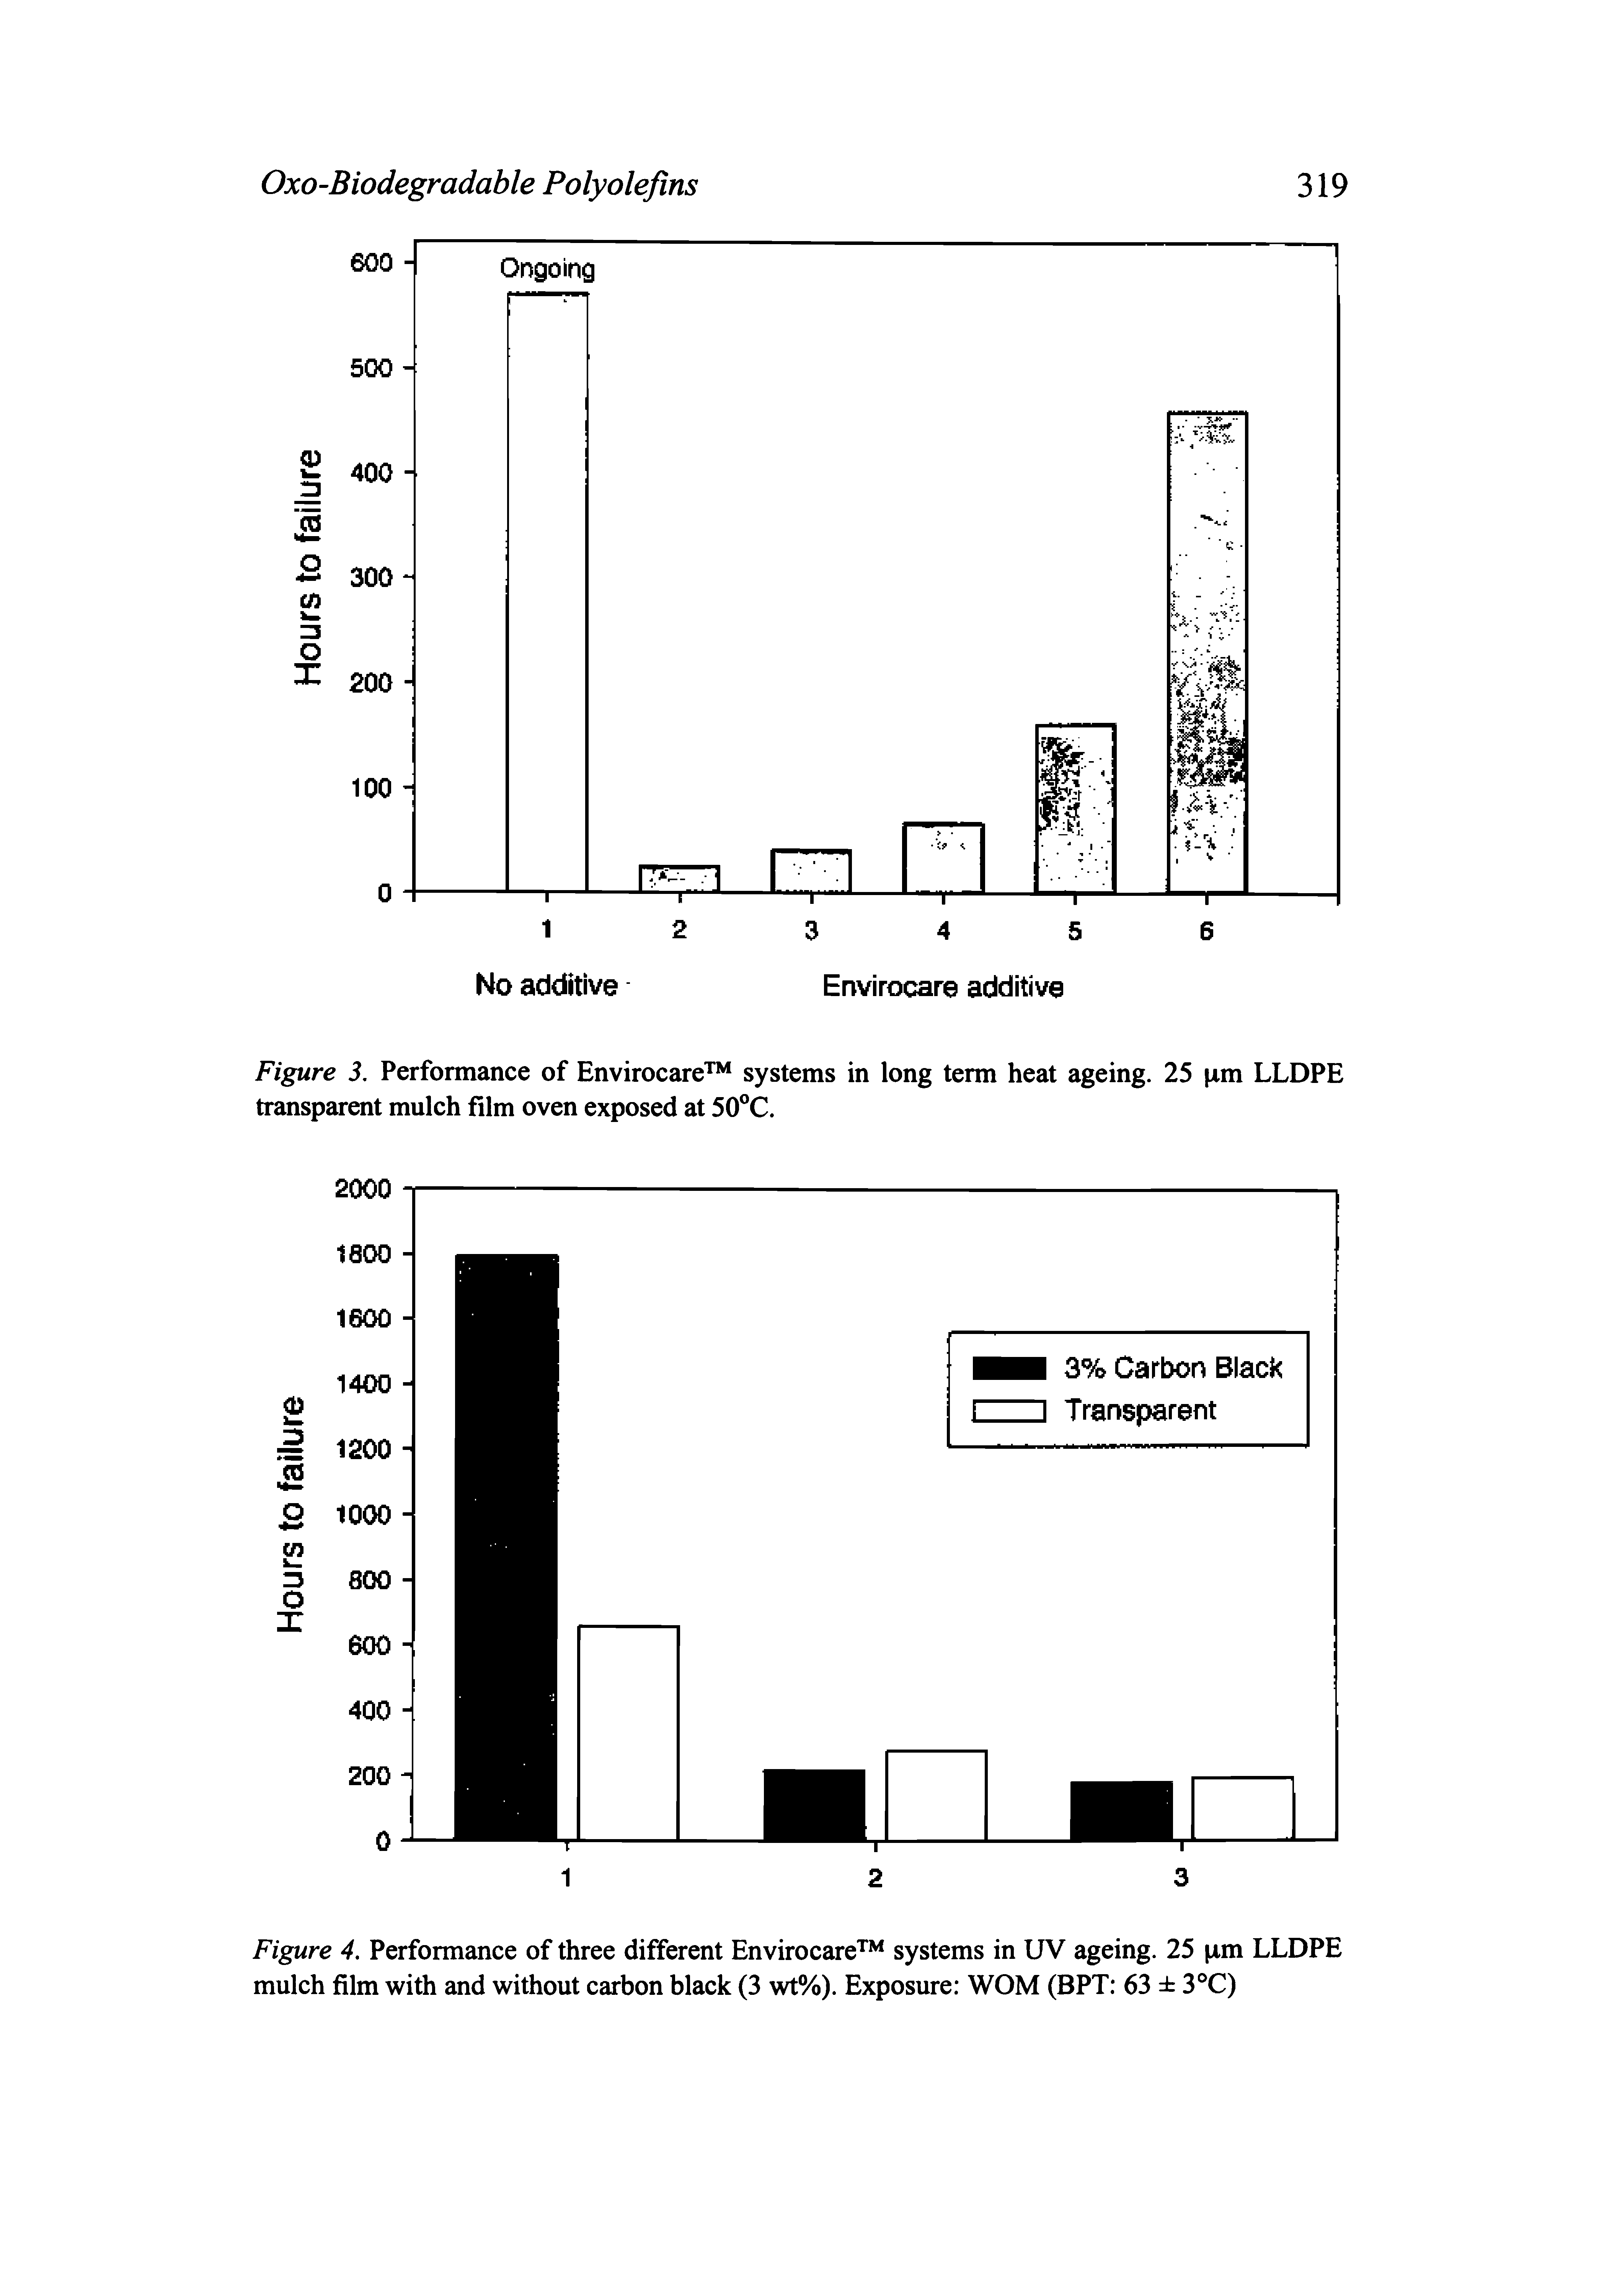 Figure 4. Performance of three different Envirocare systems in UV ageing. 25 im LLDPE mulch film with and without carbon black (3 wt%). Exposure WOM (BPT 63 3°C)...